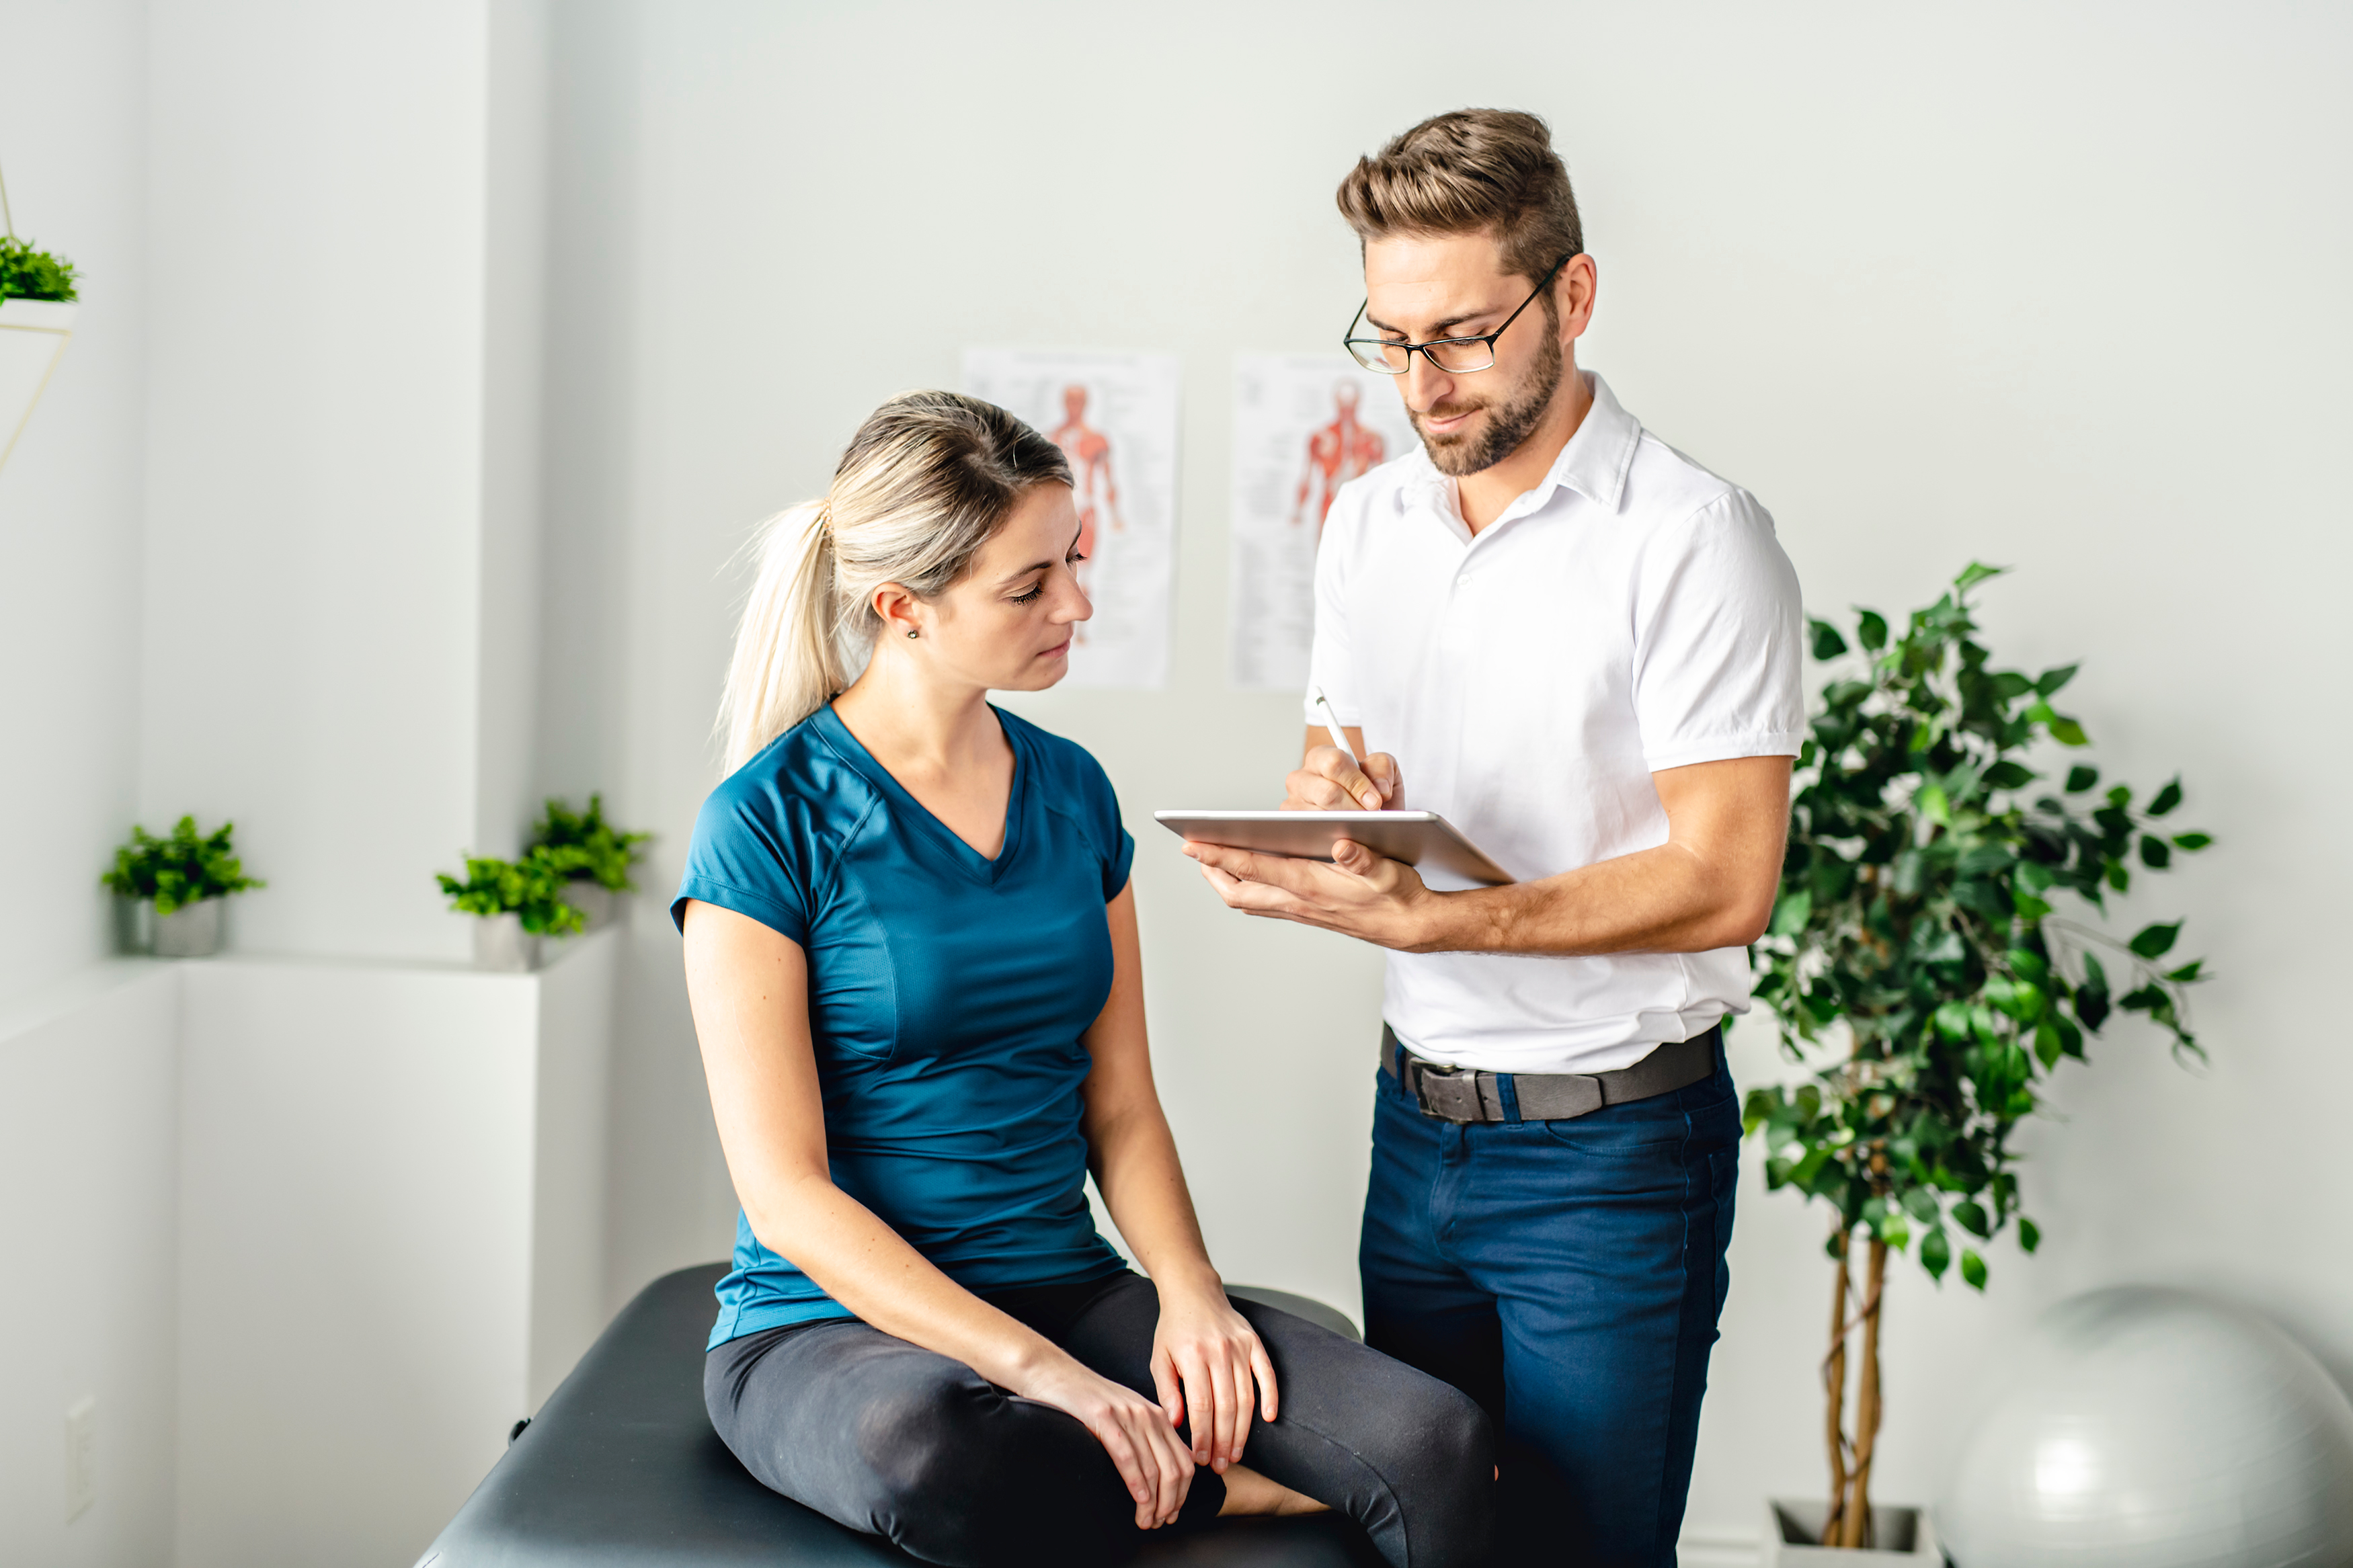 Physio assisting woman with assessment